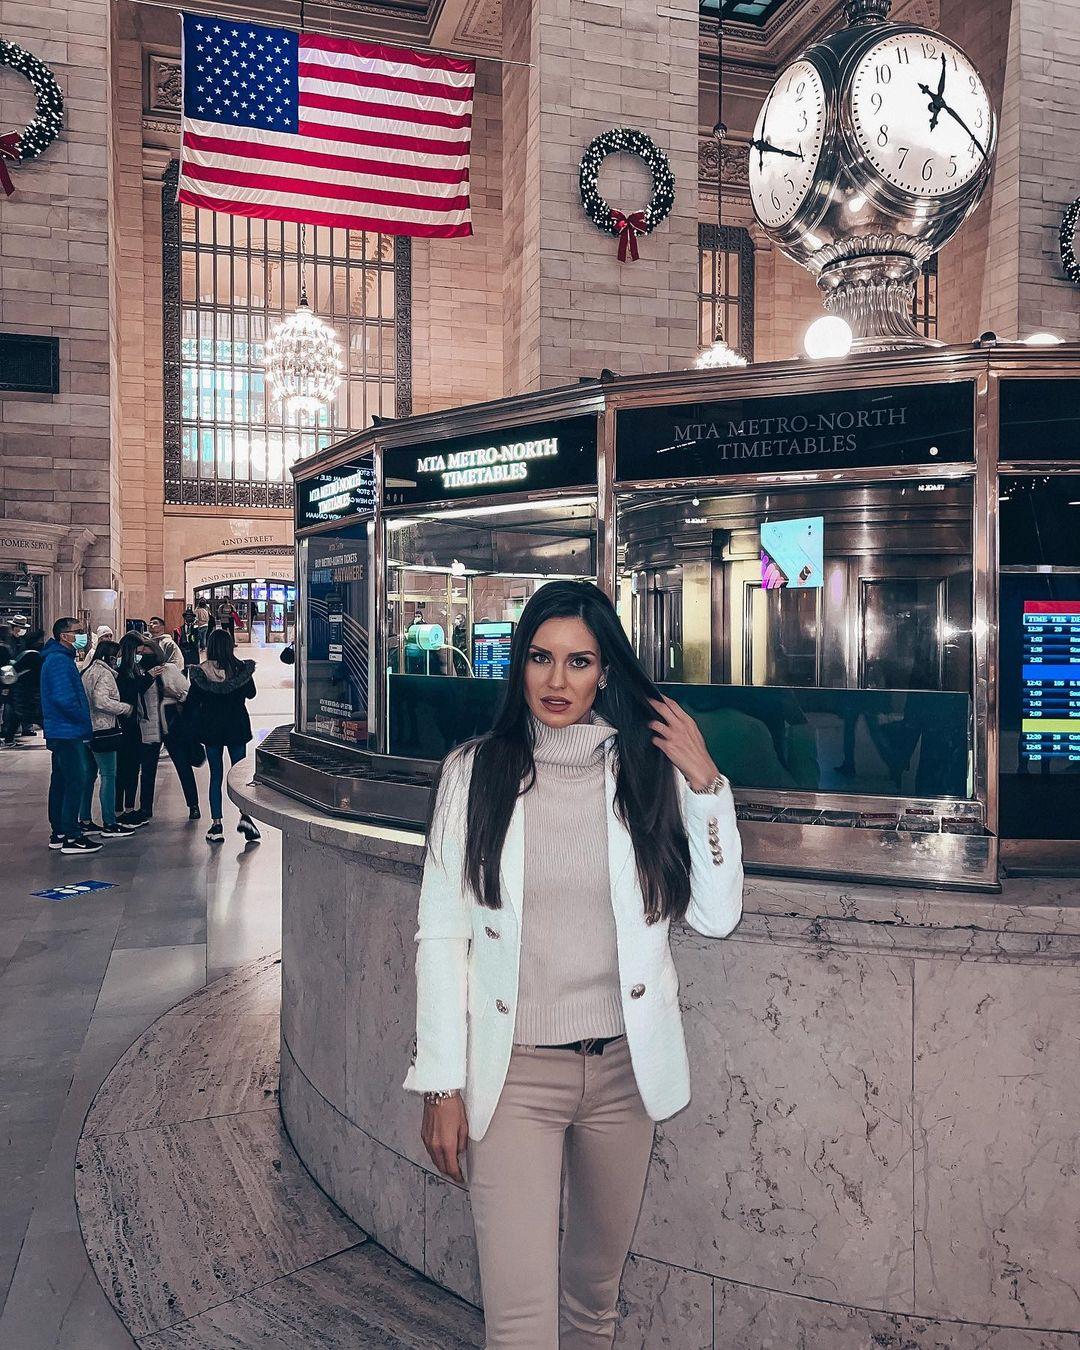 There’s something so soothing about the hum of Grand Central Station NYC! 🚇
#NY #newyork #mood